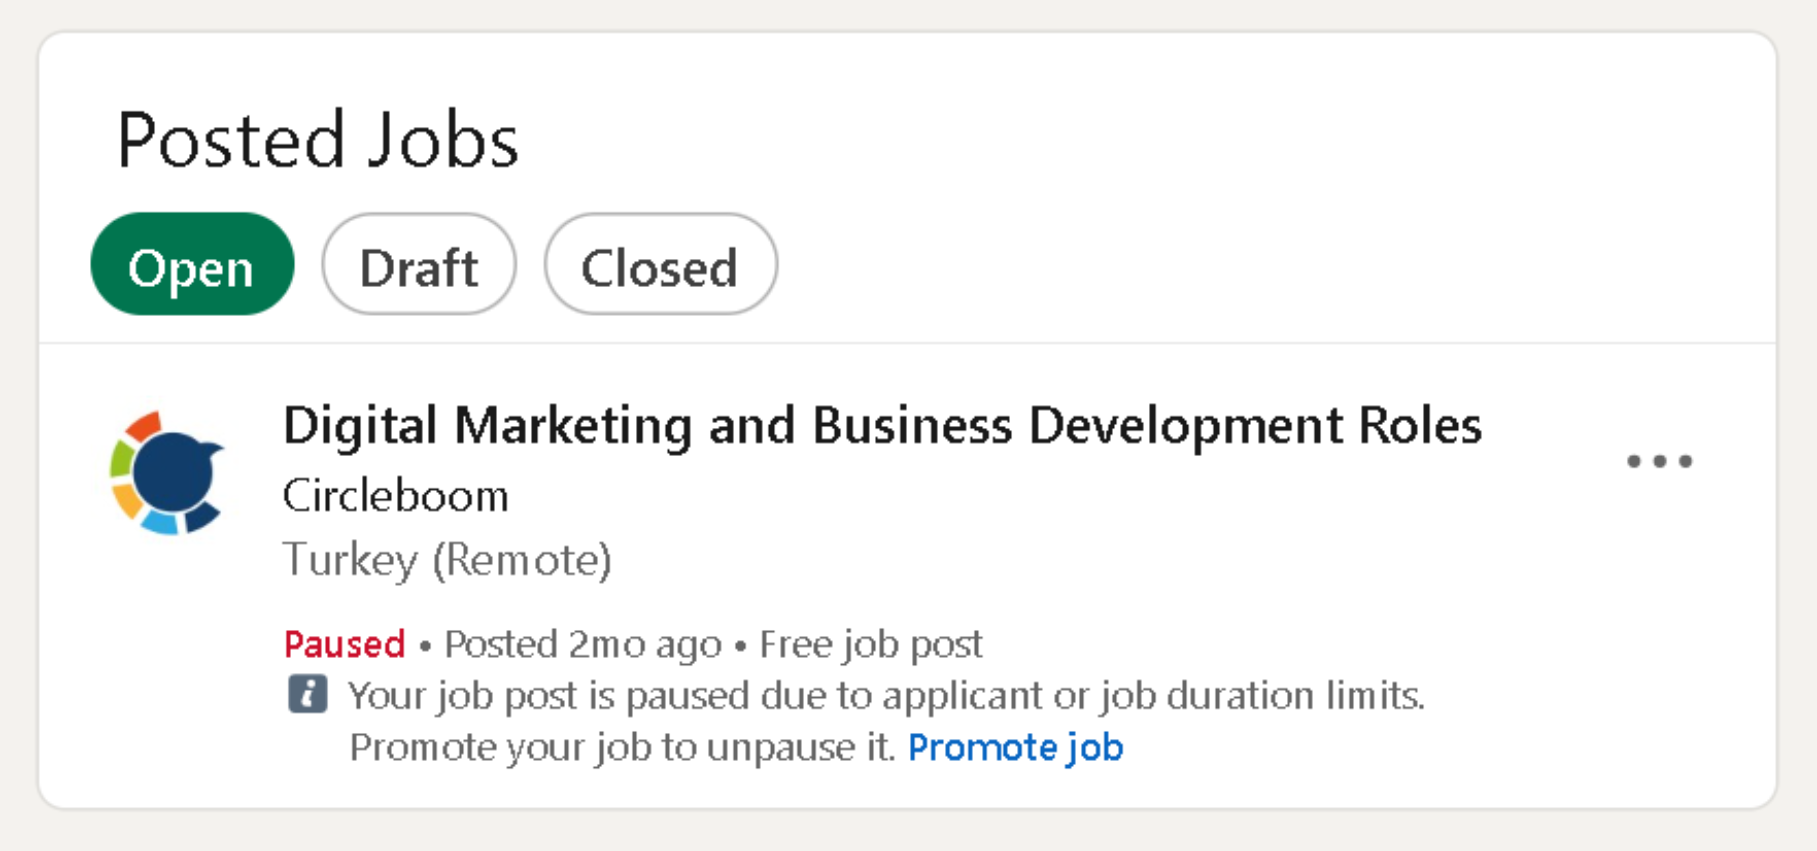 After going over LinkedIn free job post limit, the platform asks you to go with LinkedIn promoted jobs.